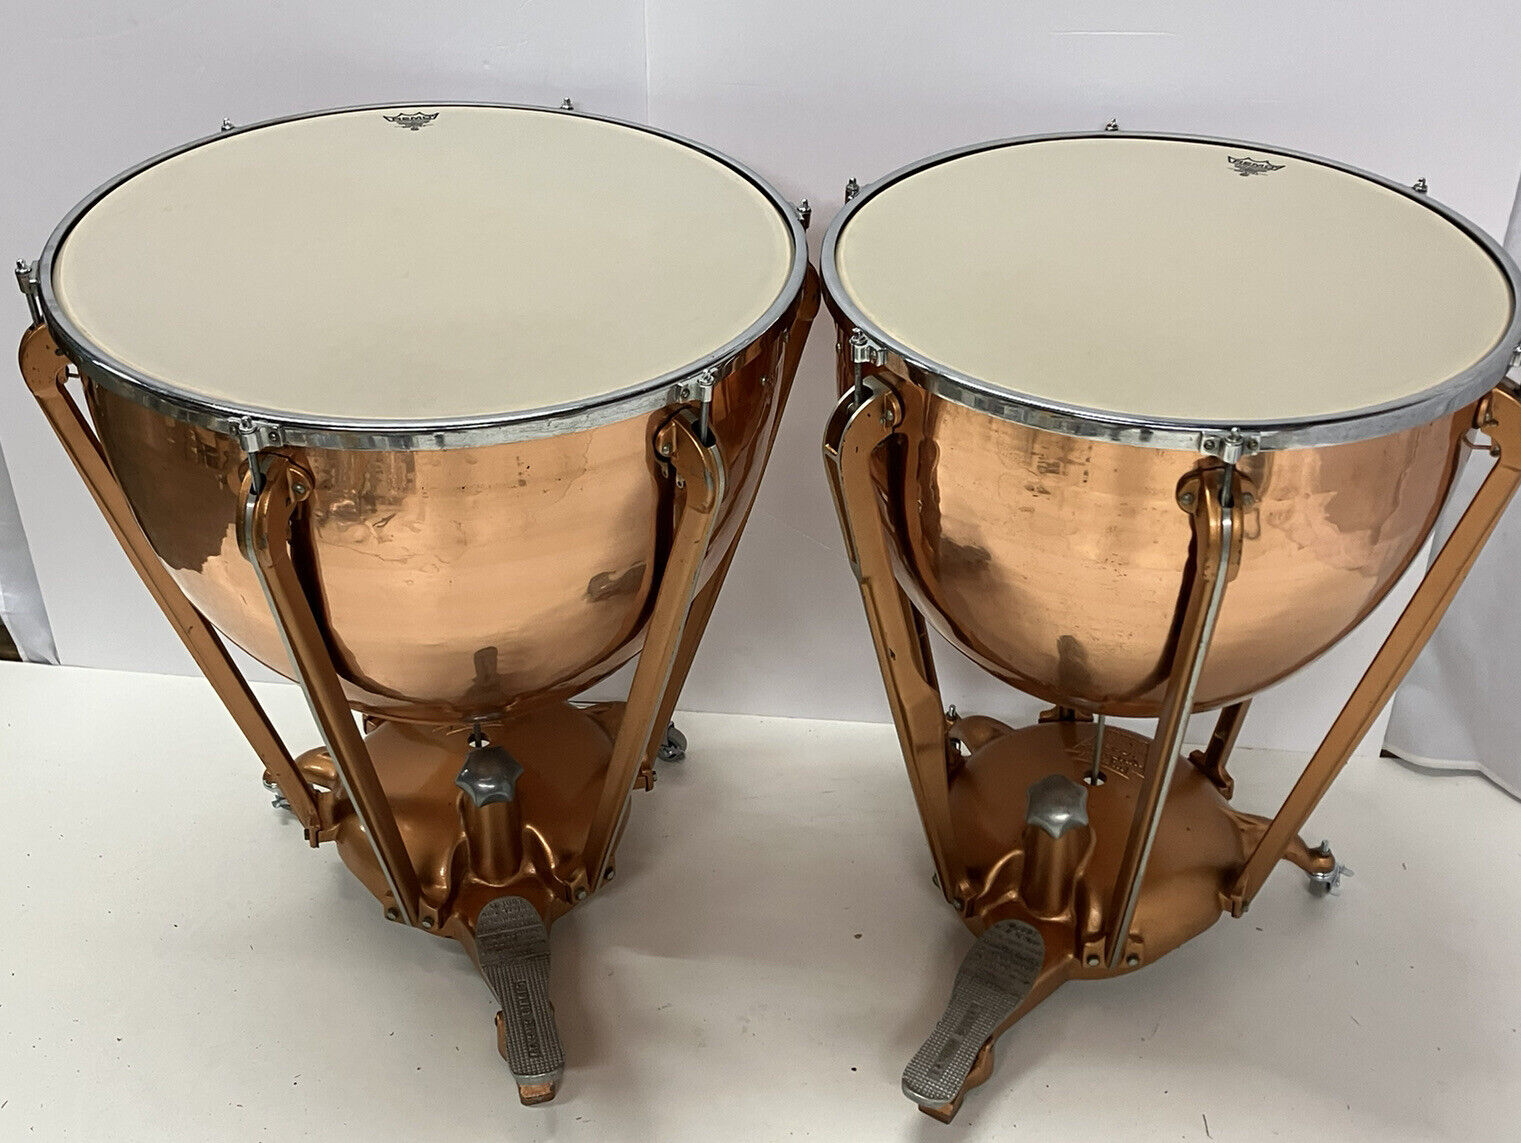 Pair Of Ludwig Copper Timpani Drums 25 And 28” Remo Renaissance Heads Will Ship